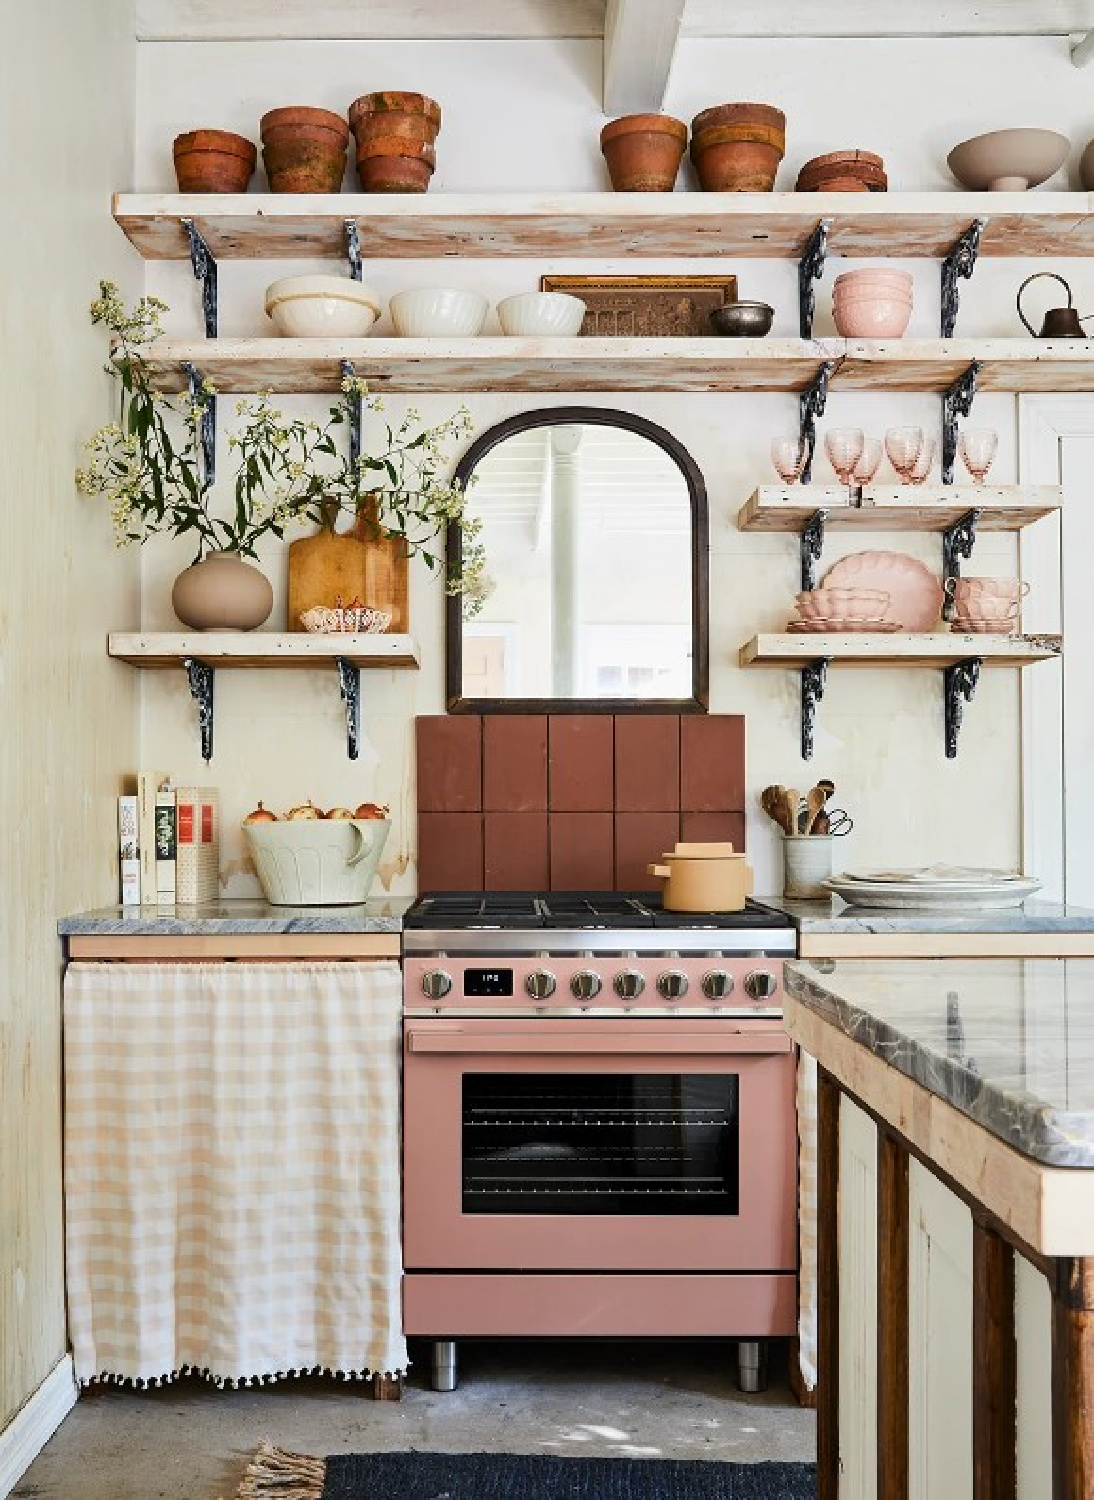 Leanne Ford designed kitchen with dusty rose range in her Pittsburgh guest cottage - photo by Erin Kelly for Pittsburgh Post Gazette. #modernrustic #vintagestyle